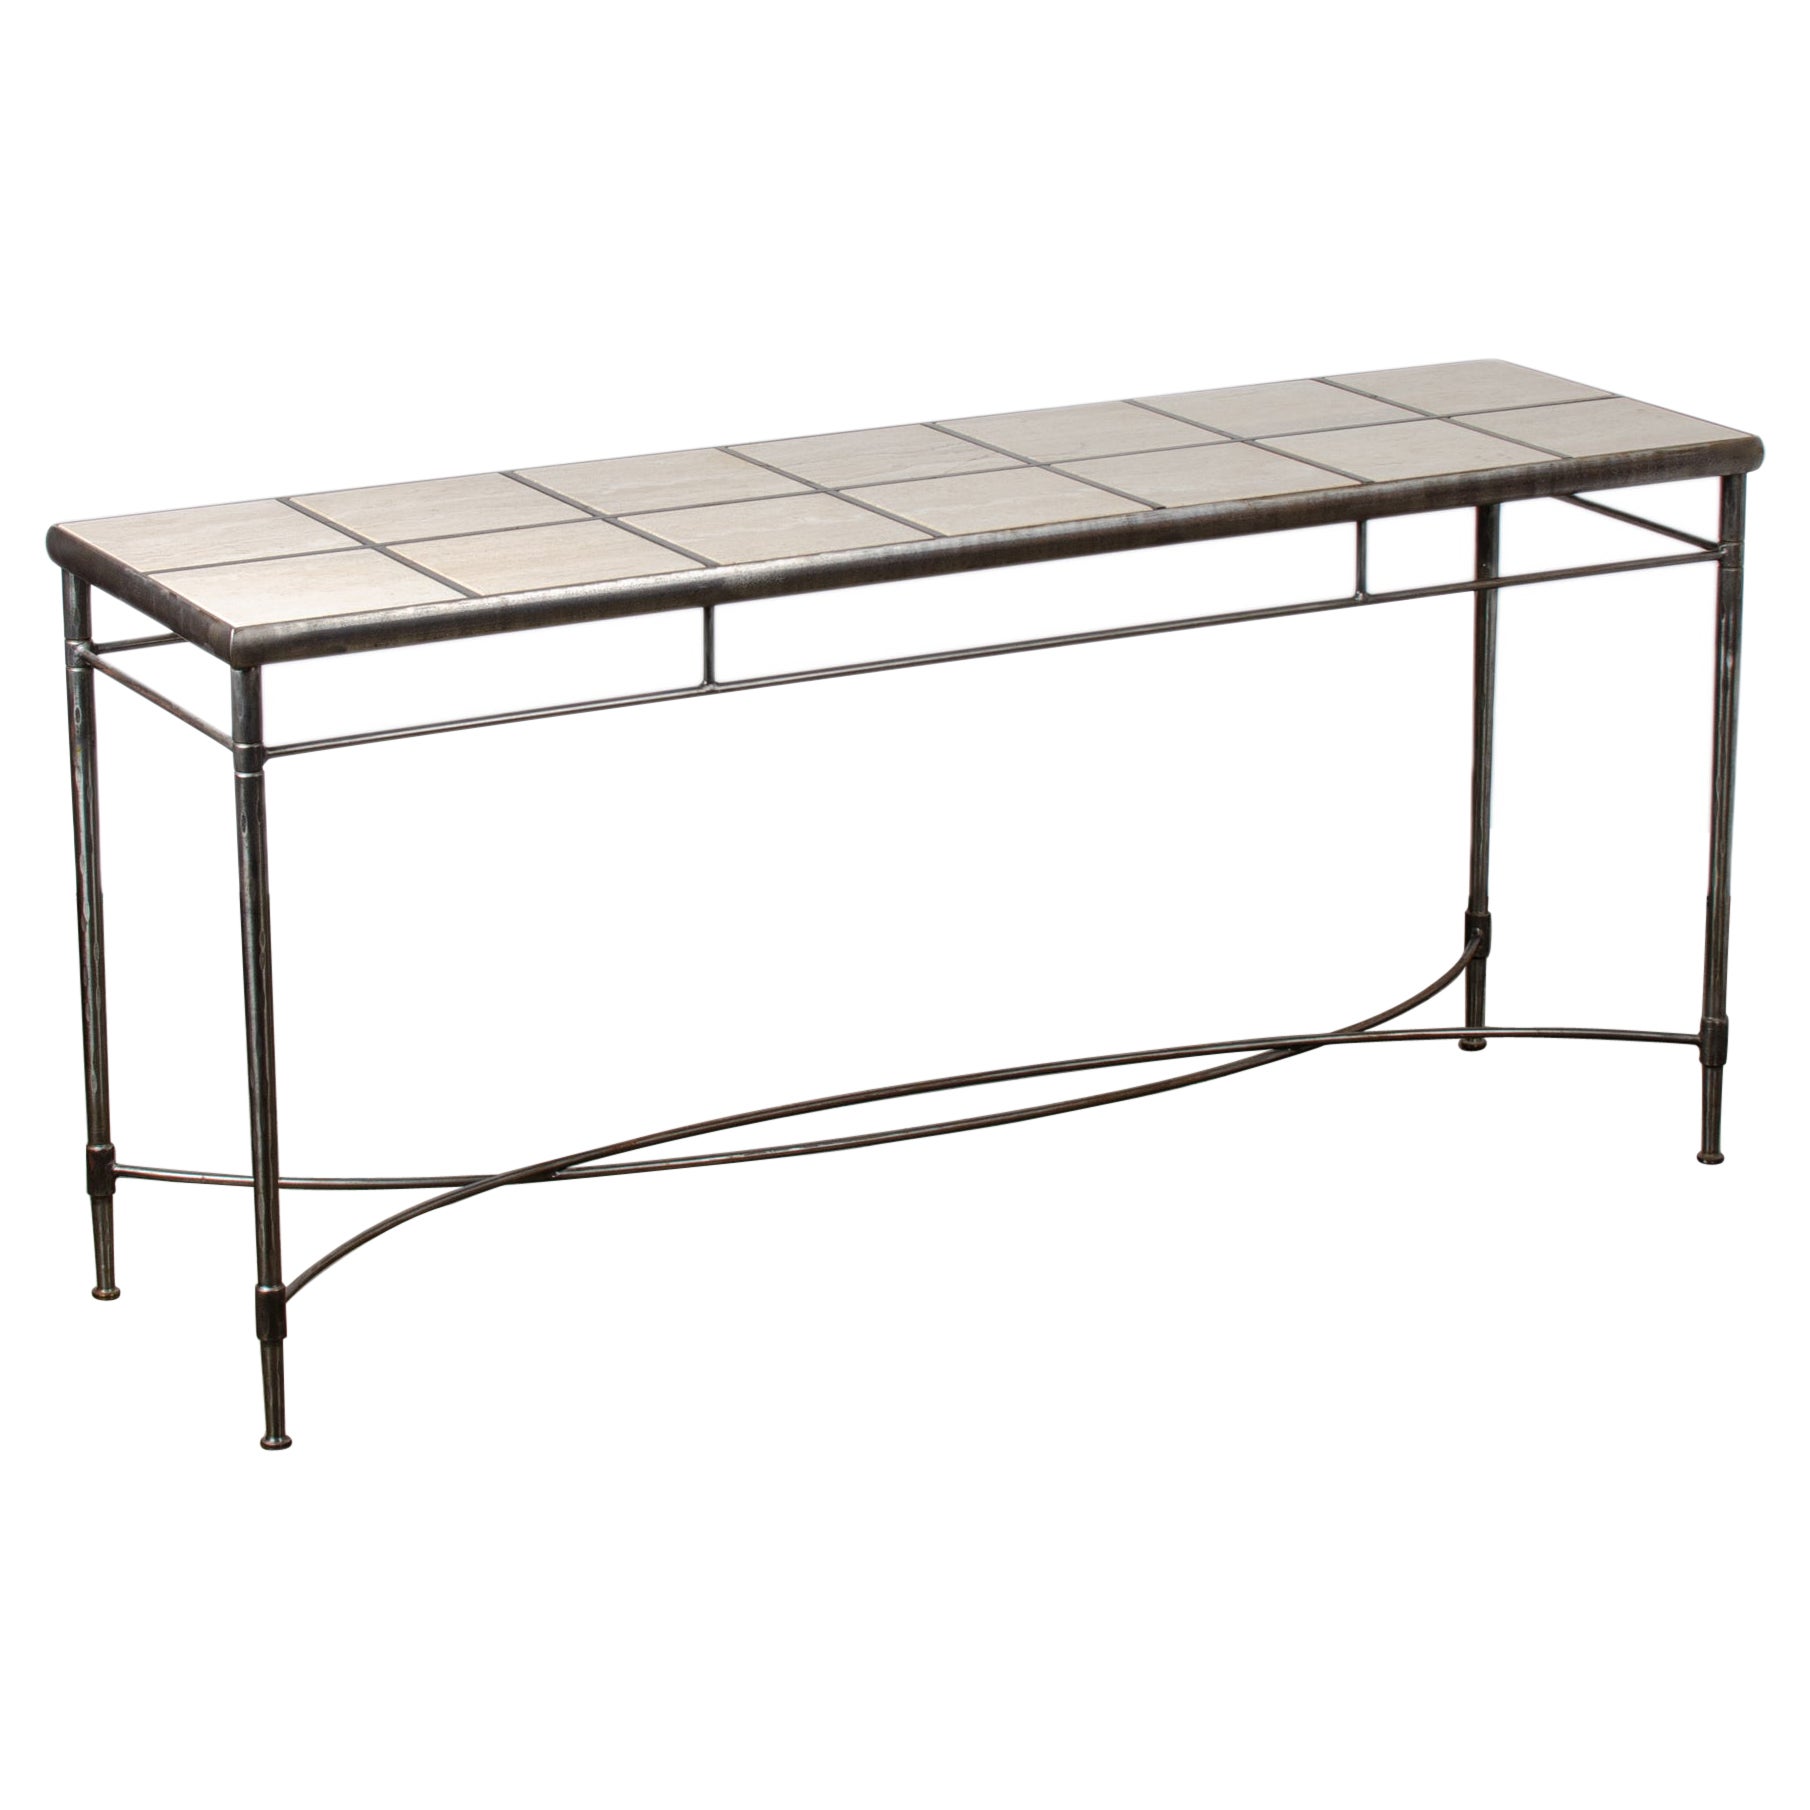 Italian Iron and Travertine Tile Console Table Regular price For Sale